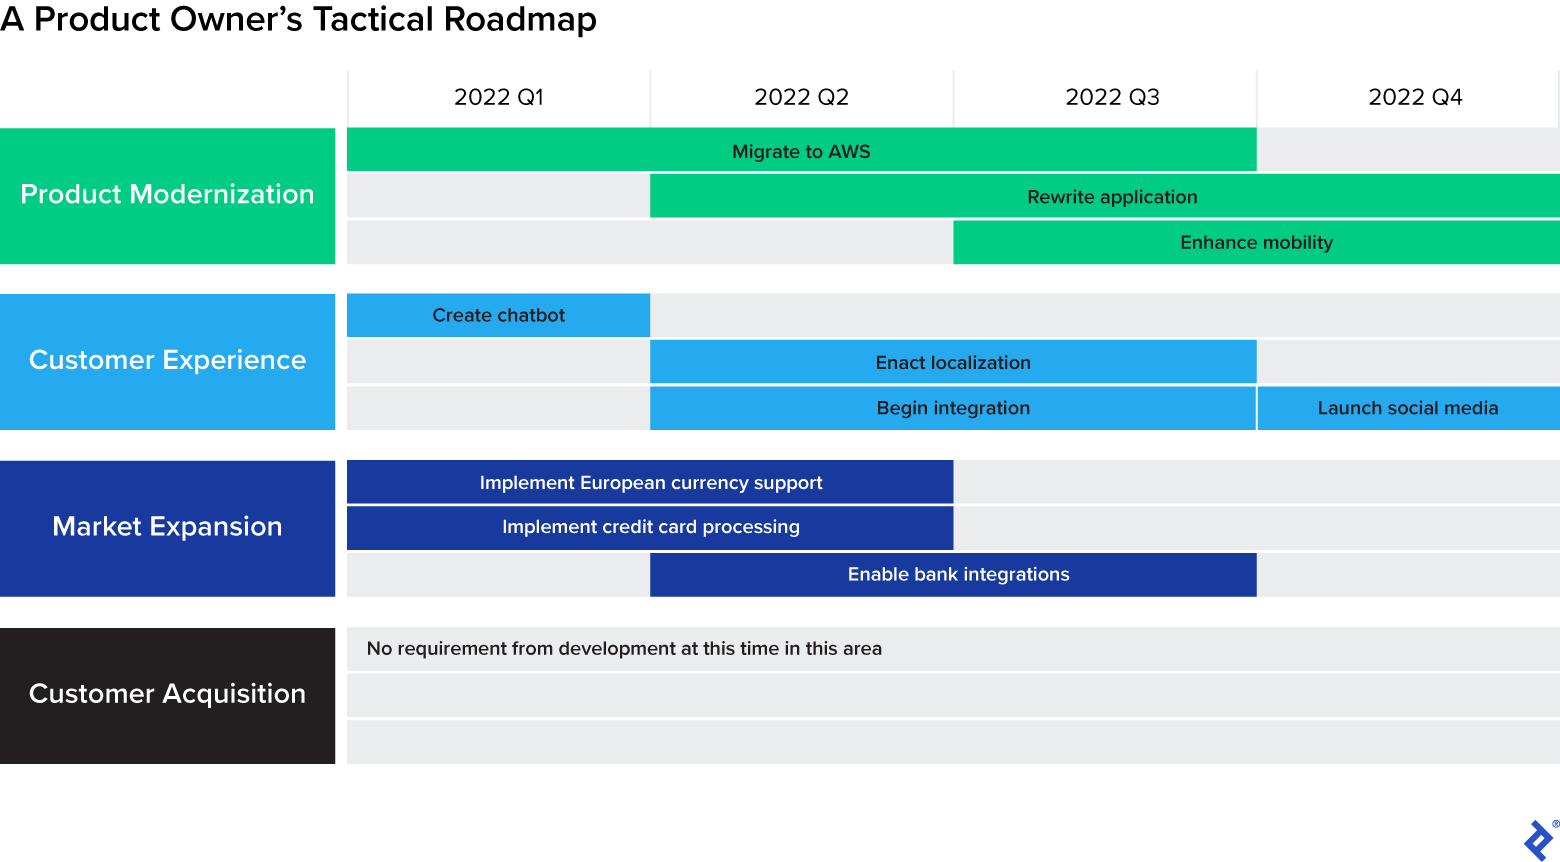 An illustration of a product roadmap, titled, “A Product Owner’s Tactical Roadmap.” There are four rows, labeled “Product Modernization,” “Customer Experience,” “Market Expansion,” and “Customer Acquisition.” Each row is divided into three sub-rows, and accompanied by four column labels, “2022 Q1,” “2022 Q2,” “2022 Q3,” and “2022 Q4.” In the first sub-row of Product Modernization is a box labeled “Migrate to AWS” that crosses 2022 Q1, 2022 Q2, and 2022 Q3. In the secod sub-row, a box labeled “Rewrite application” crosses 2022 Q2, 2022 Q3, and 2022 Q4. In the third sub-row, a box labeled “Enhance mobility” crosses 2022 Q3 and 2022 Q4. In the first sub-row of Customer Experience, a box labeled “Create chatbot” is on 2022 Q1. In the second sub-row, a box labeled “Enact localization” crosses 2022 Q2 and 2022 Q3. In the third sub-row, a box labeled “Begin integration” crosses 2022 Q2 and 2022 Q3, and a box labeled “Launch social media” is on 2022 Q4. In the first sub-row of Market Expansion, a box labeled “Implement European currency support” crosses 2022 Q1 and 2022 Q2. In the second sub-row a box labeled “Implement credit card processing” crosses 2022 Q1 and 2022 Q2. In the third sub-row a box labeled “Enable bank integrations” crosses 2022 Q2 and 2022 Q3. Customer Acquisition has no boxes, but the first sub-row contains the text, “No requirement from development at this time in this area.”